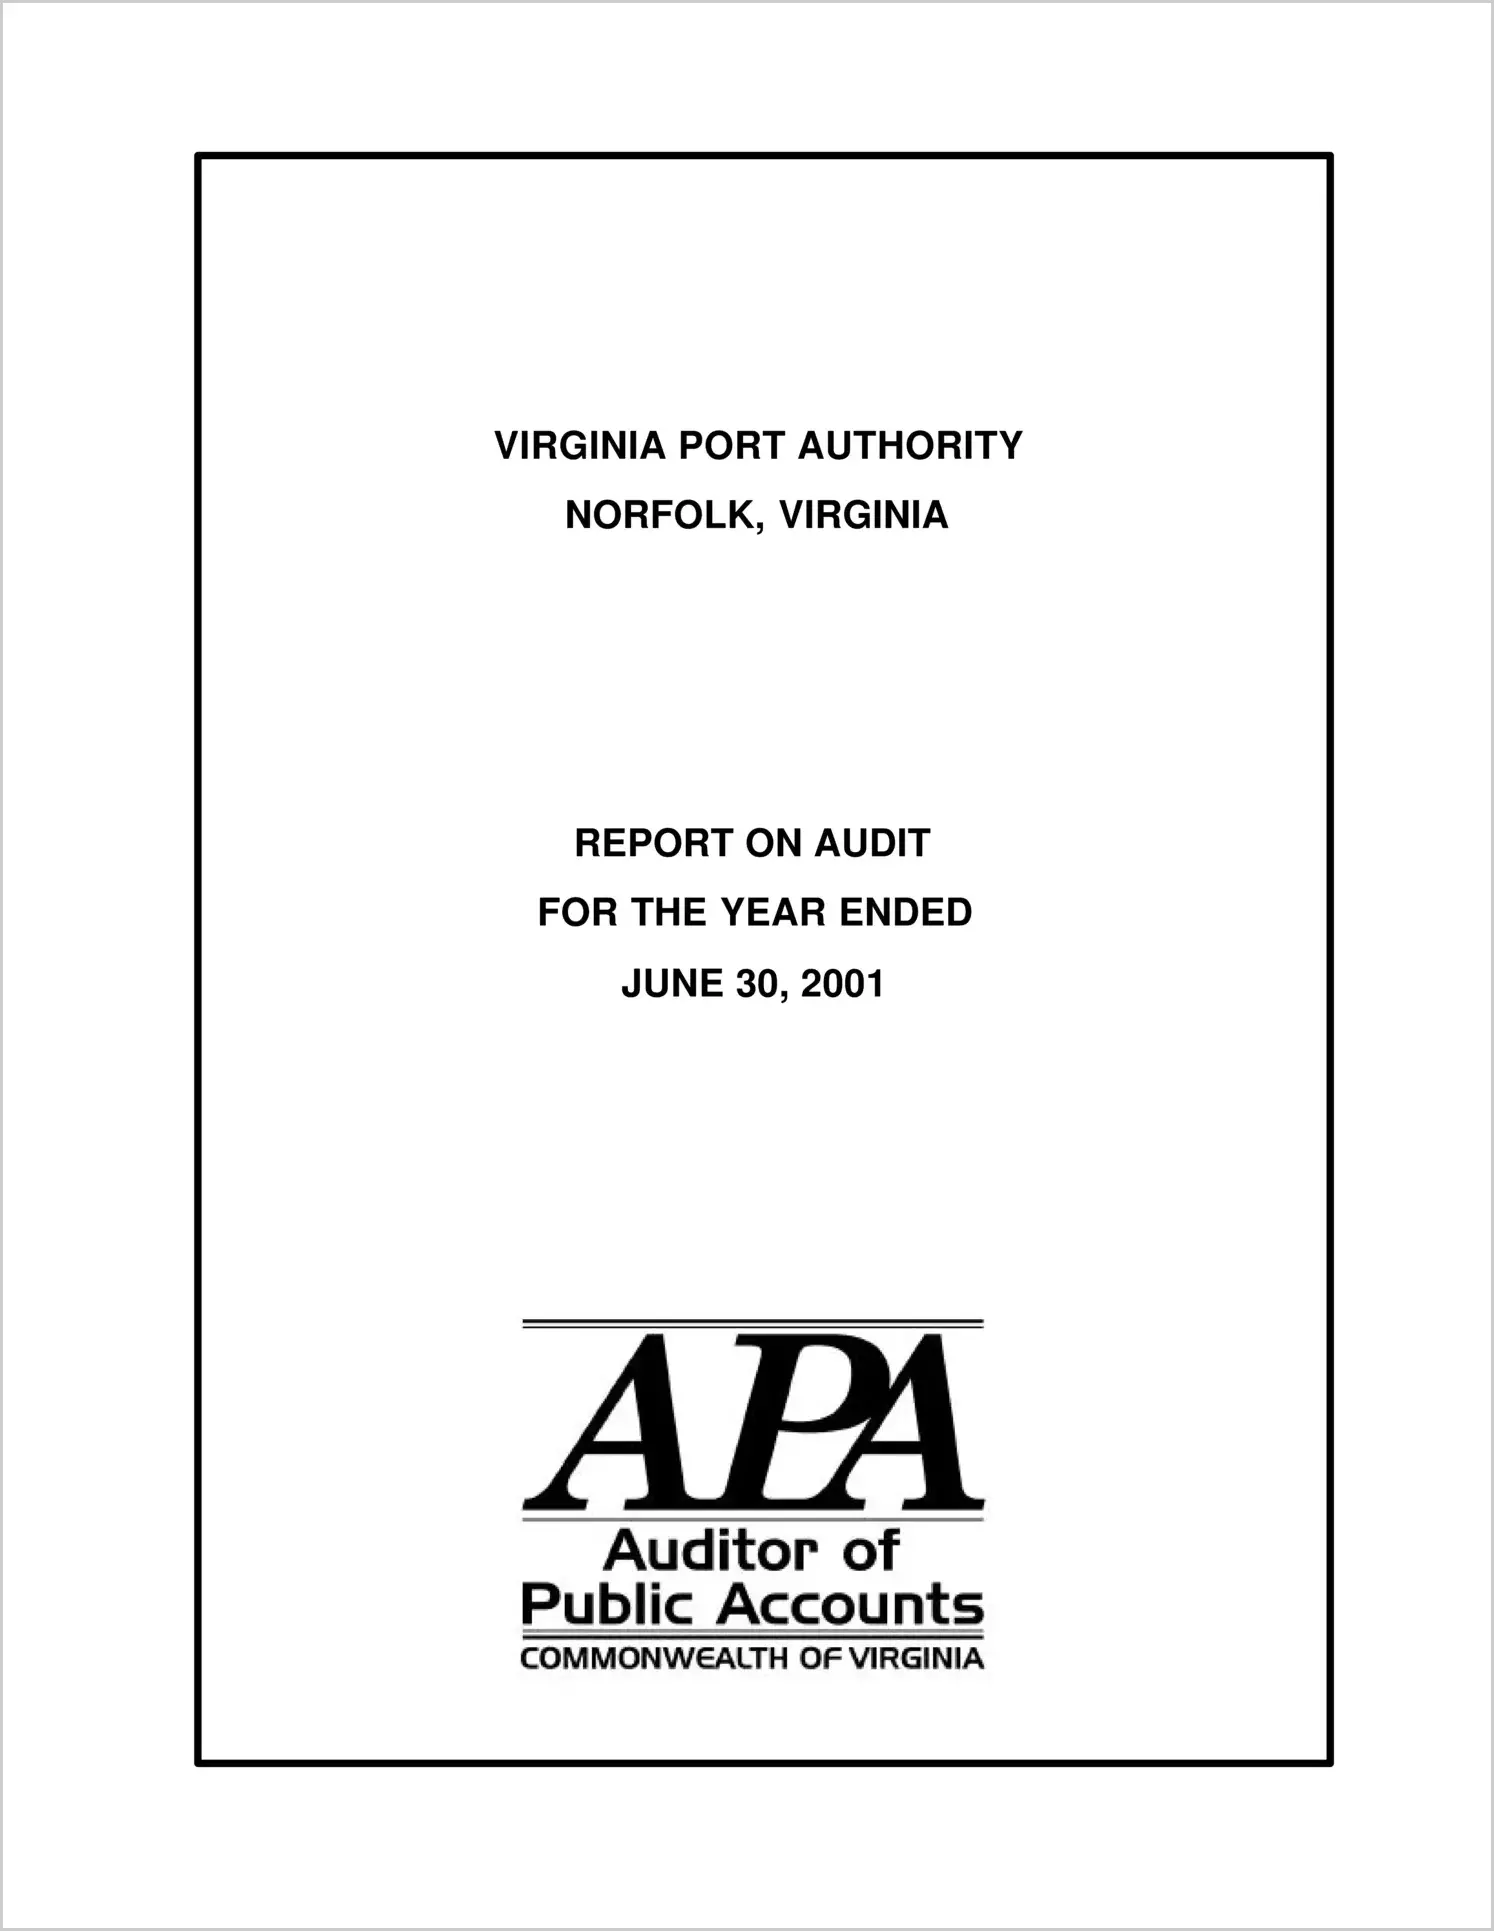 Virginia Port Authority for the year ended June 30, 2001